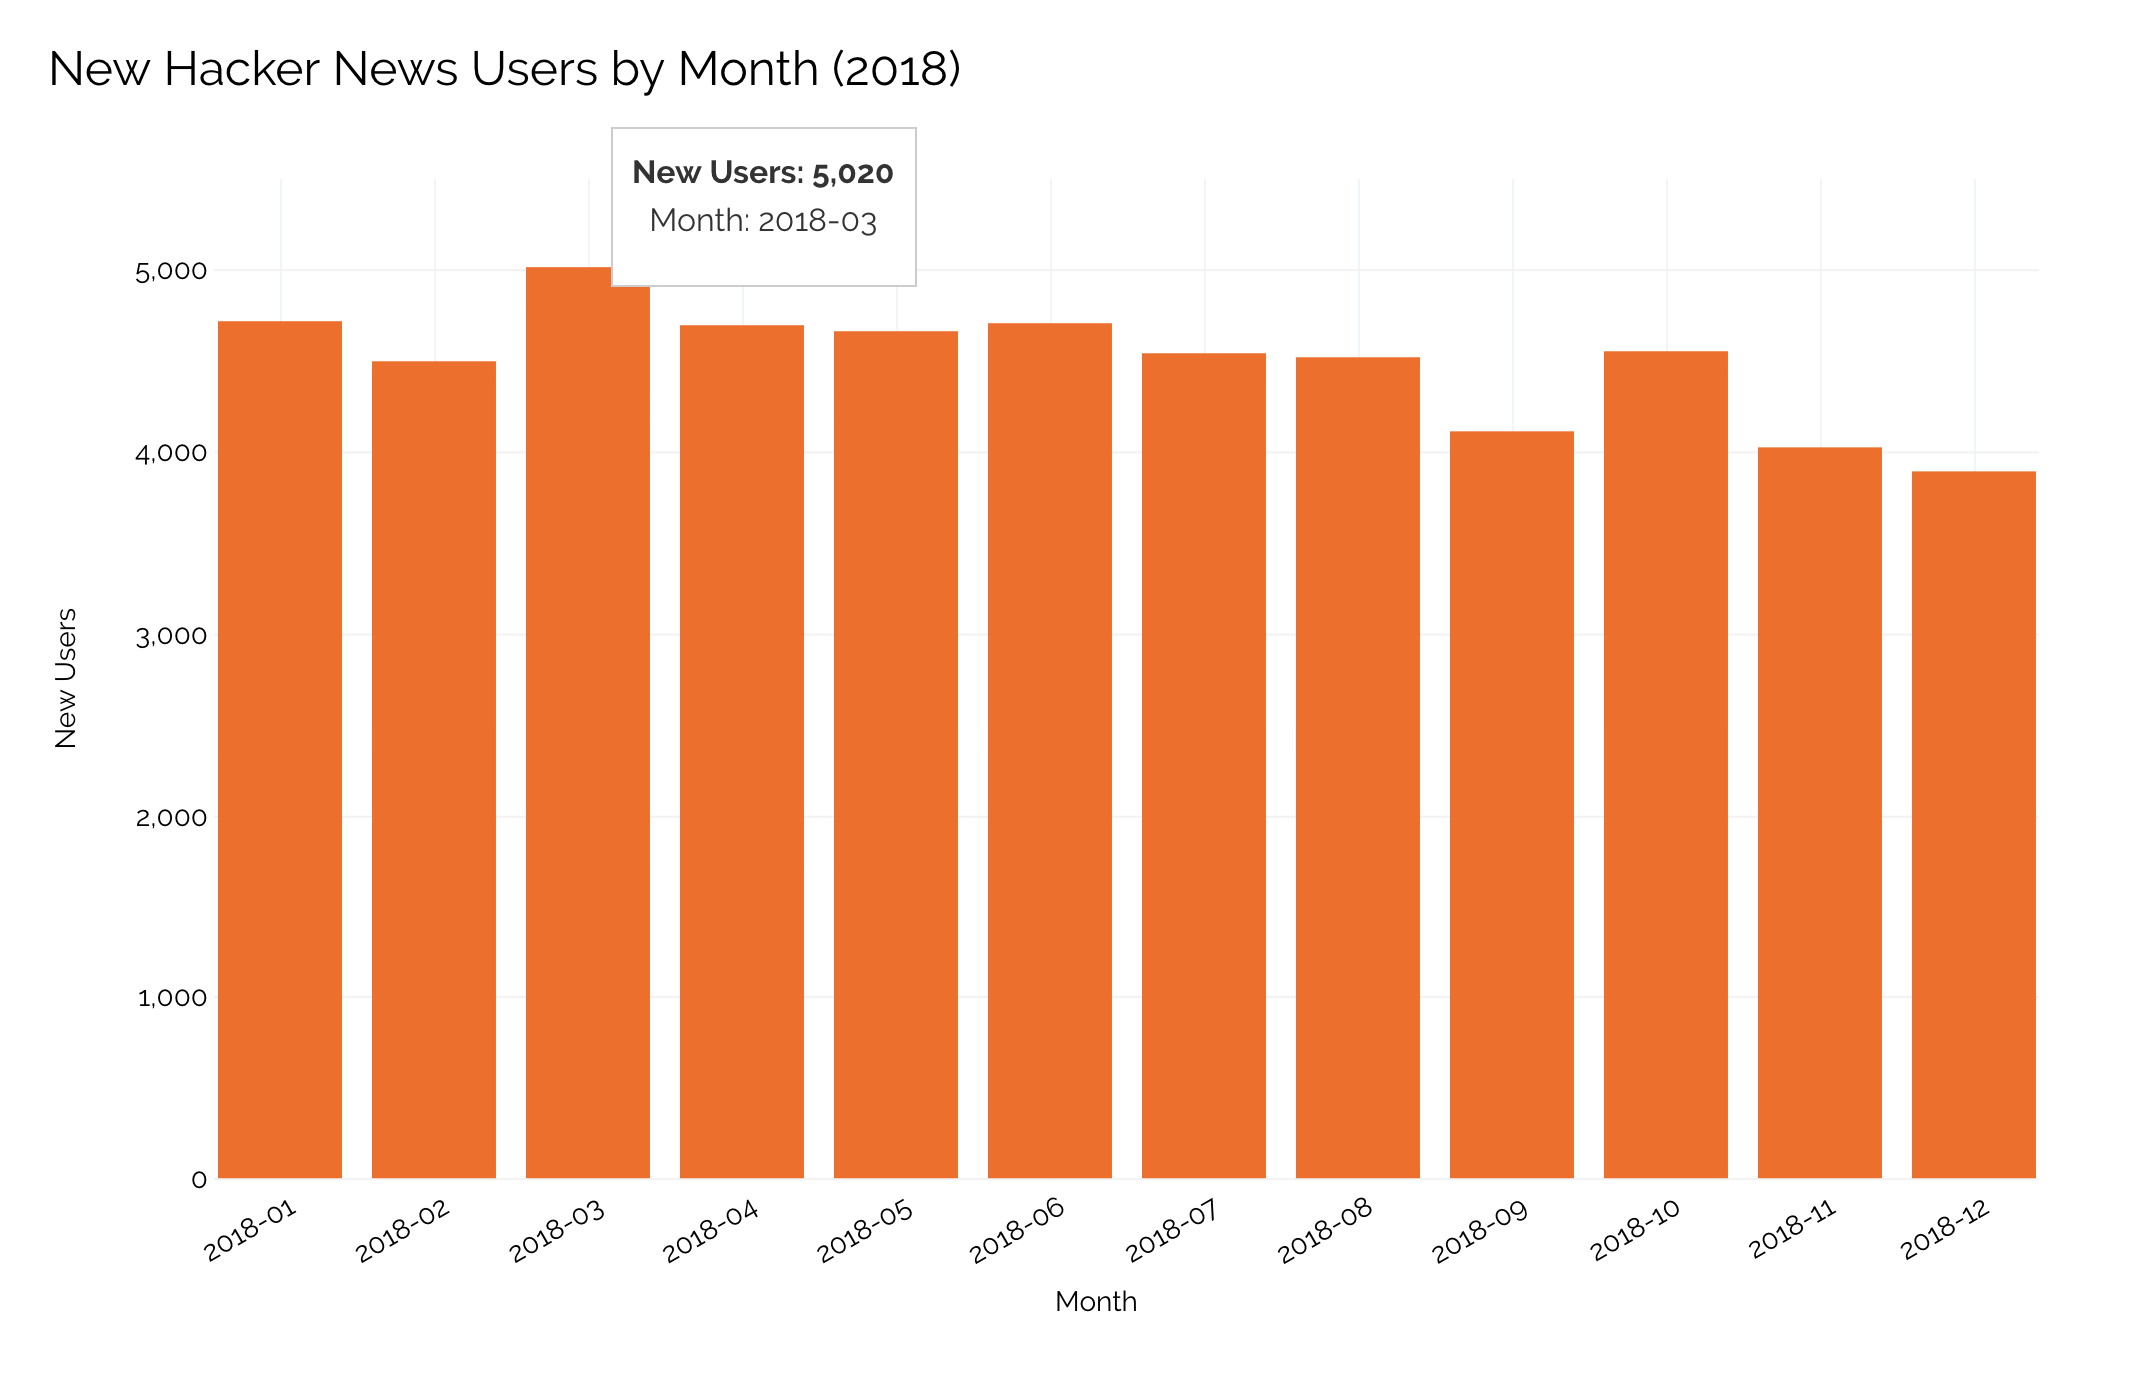 Hacker news new users by month